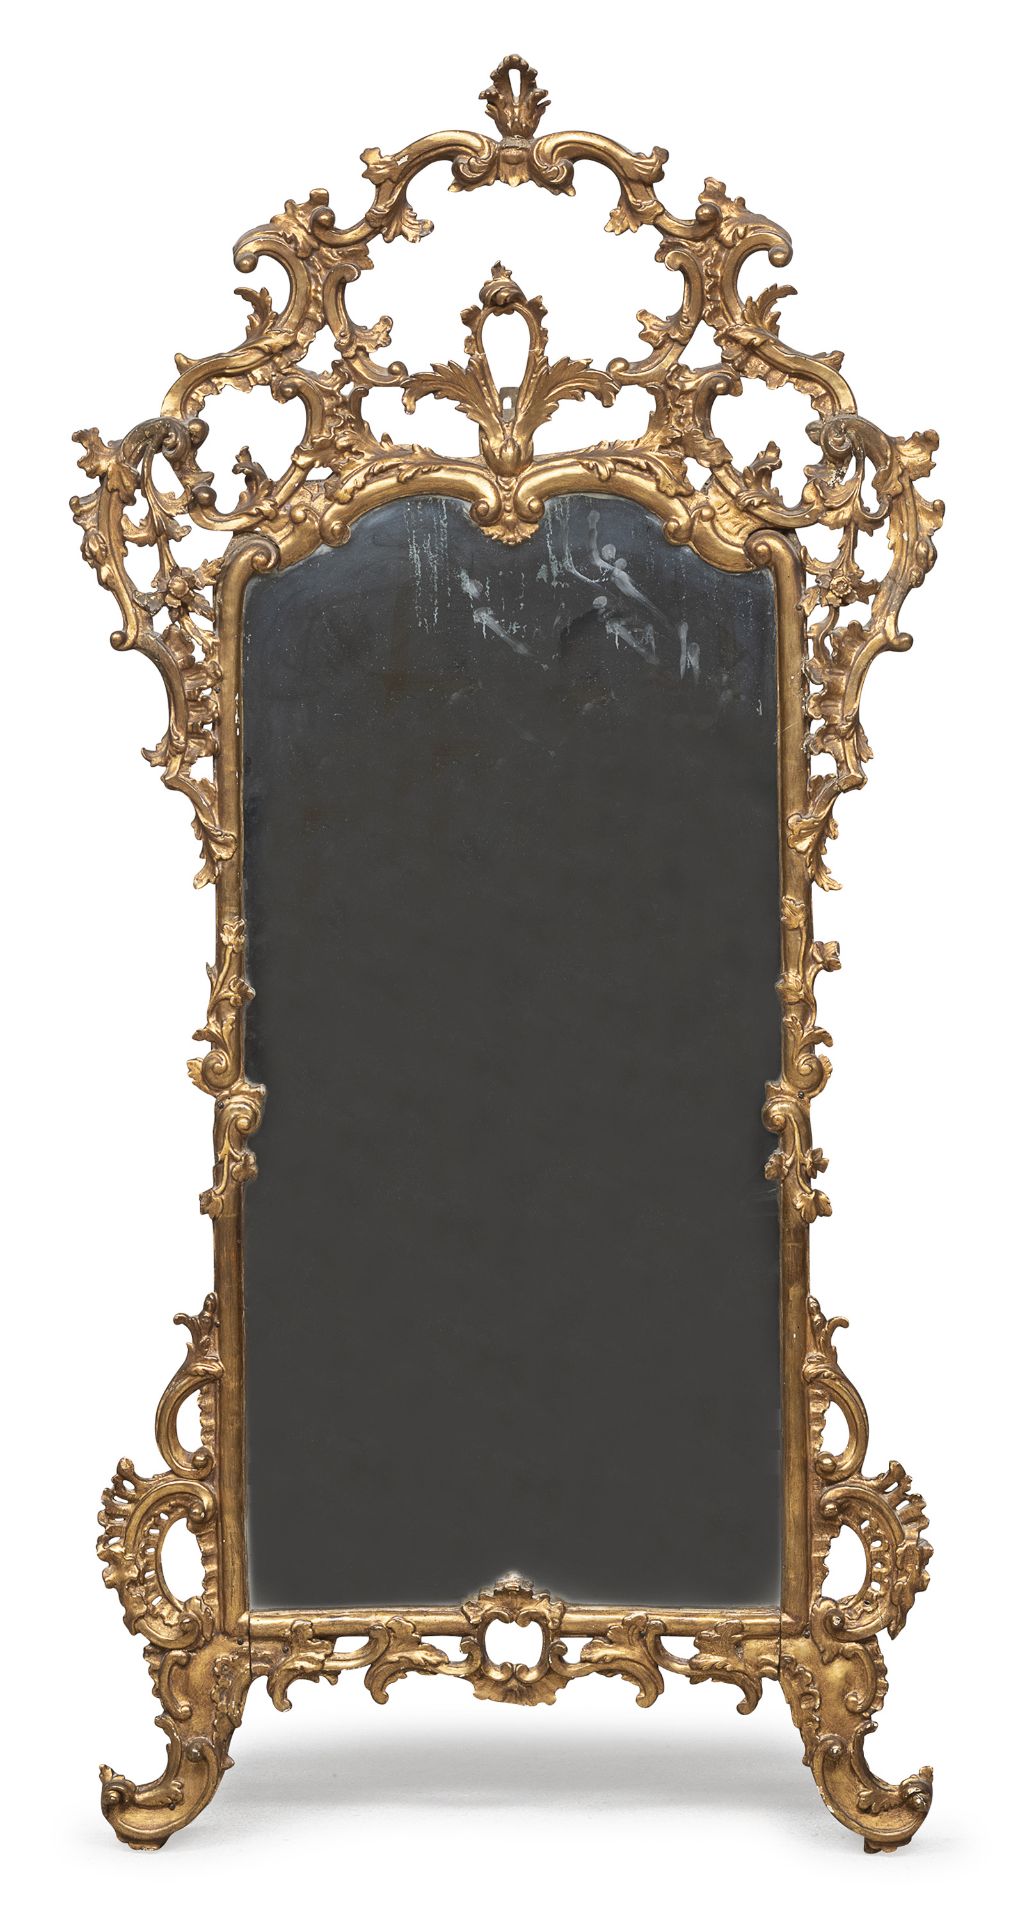 GILTWOOD MIRROR CENTRAL ITALY 18TH CENTURY